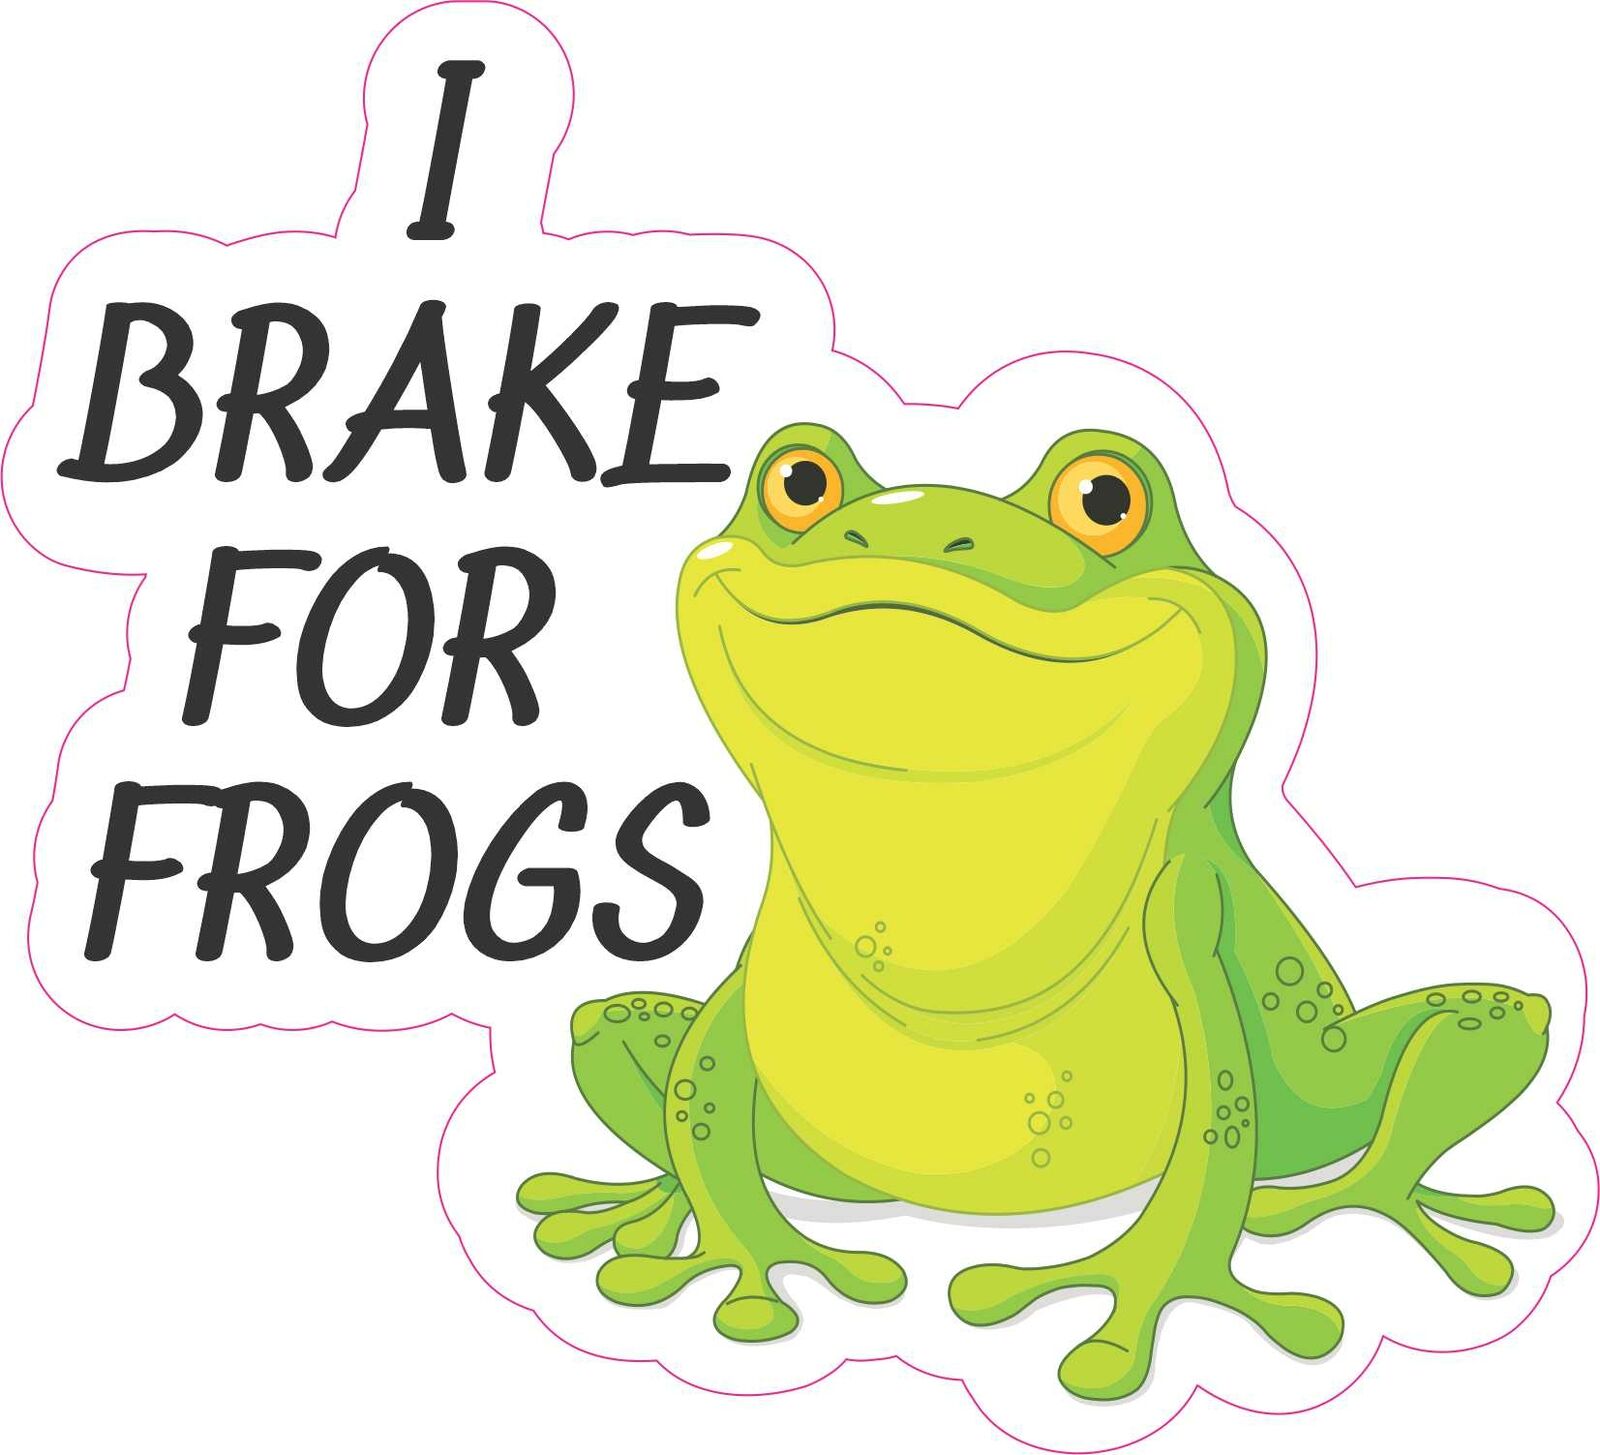 5.5in x 5in I Brake for Frogs Vinyl Sticker Car Truck Vehicle Bumper Decal